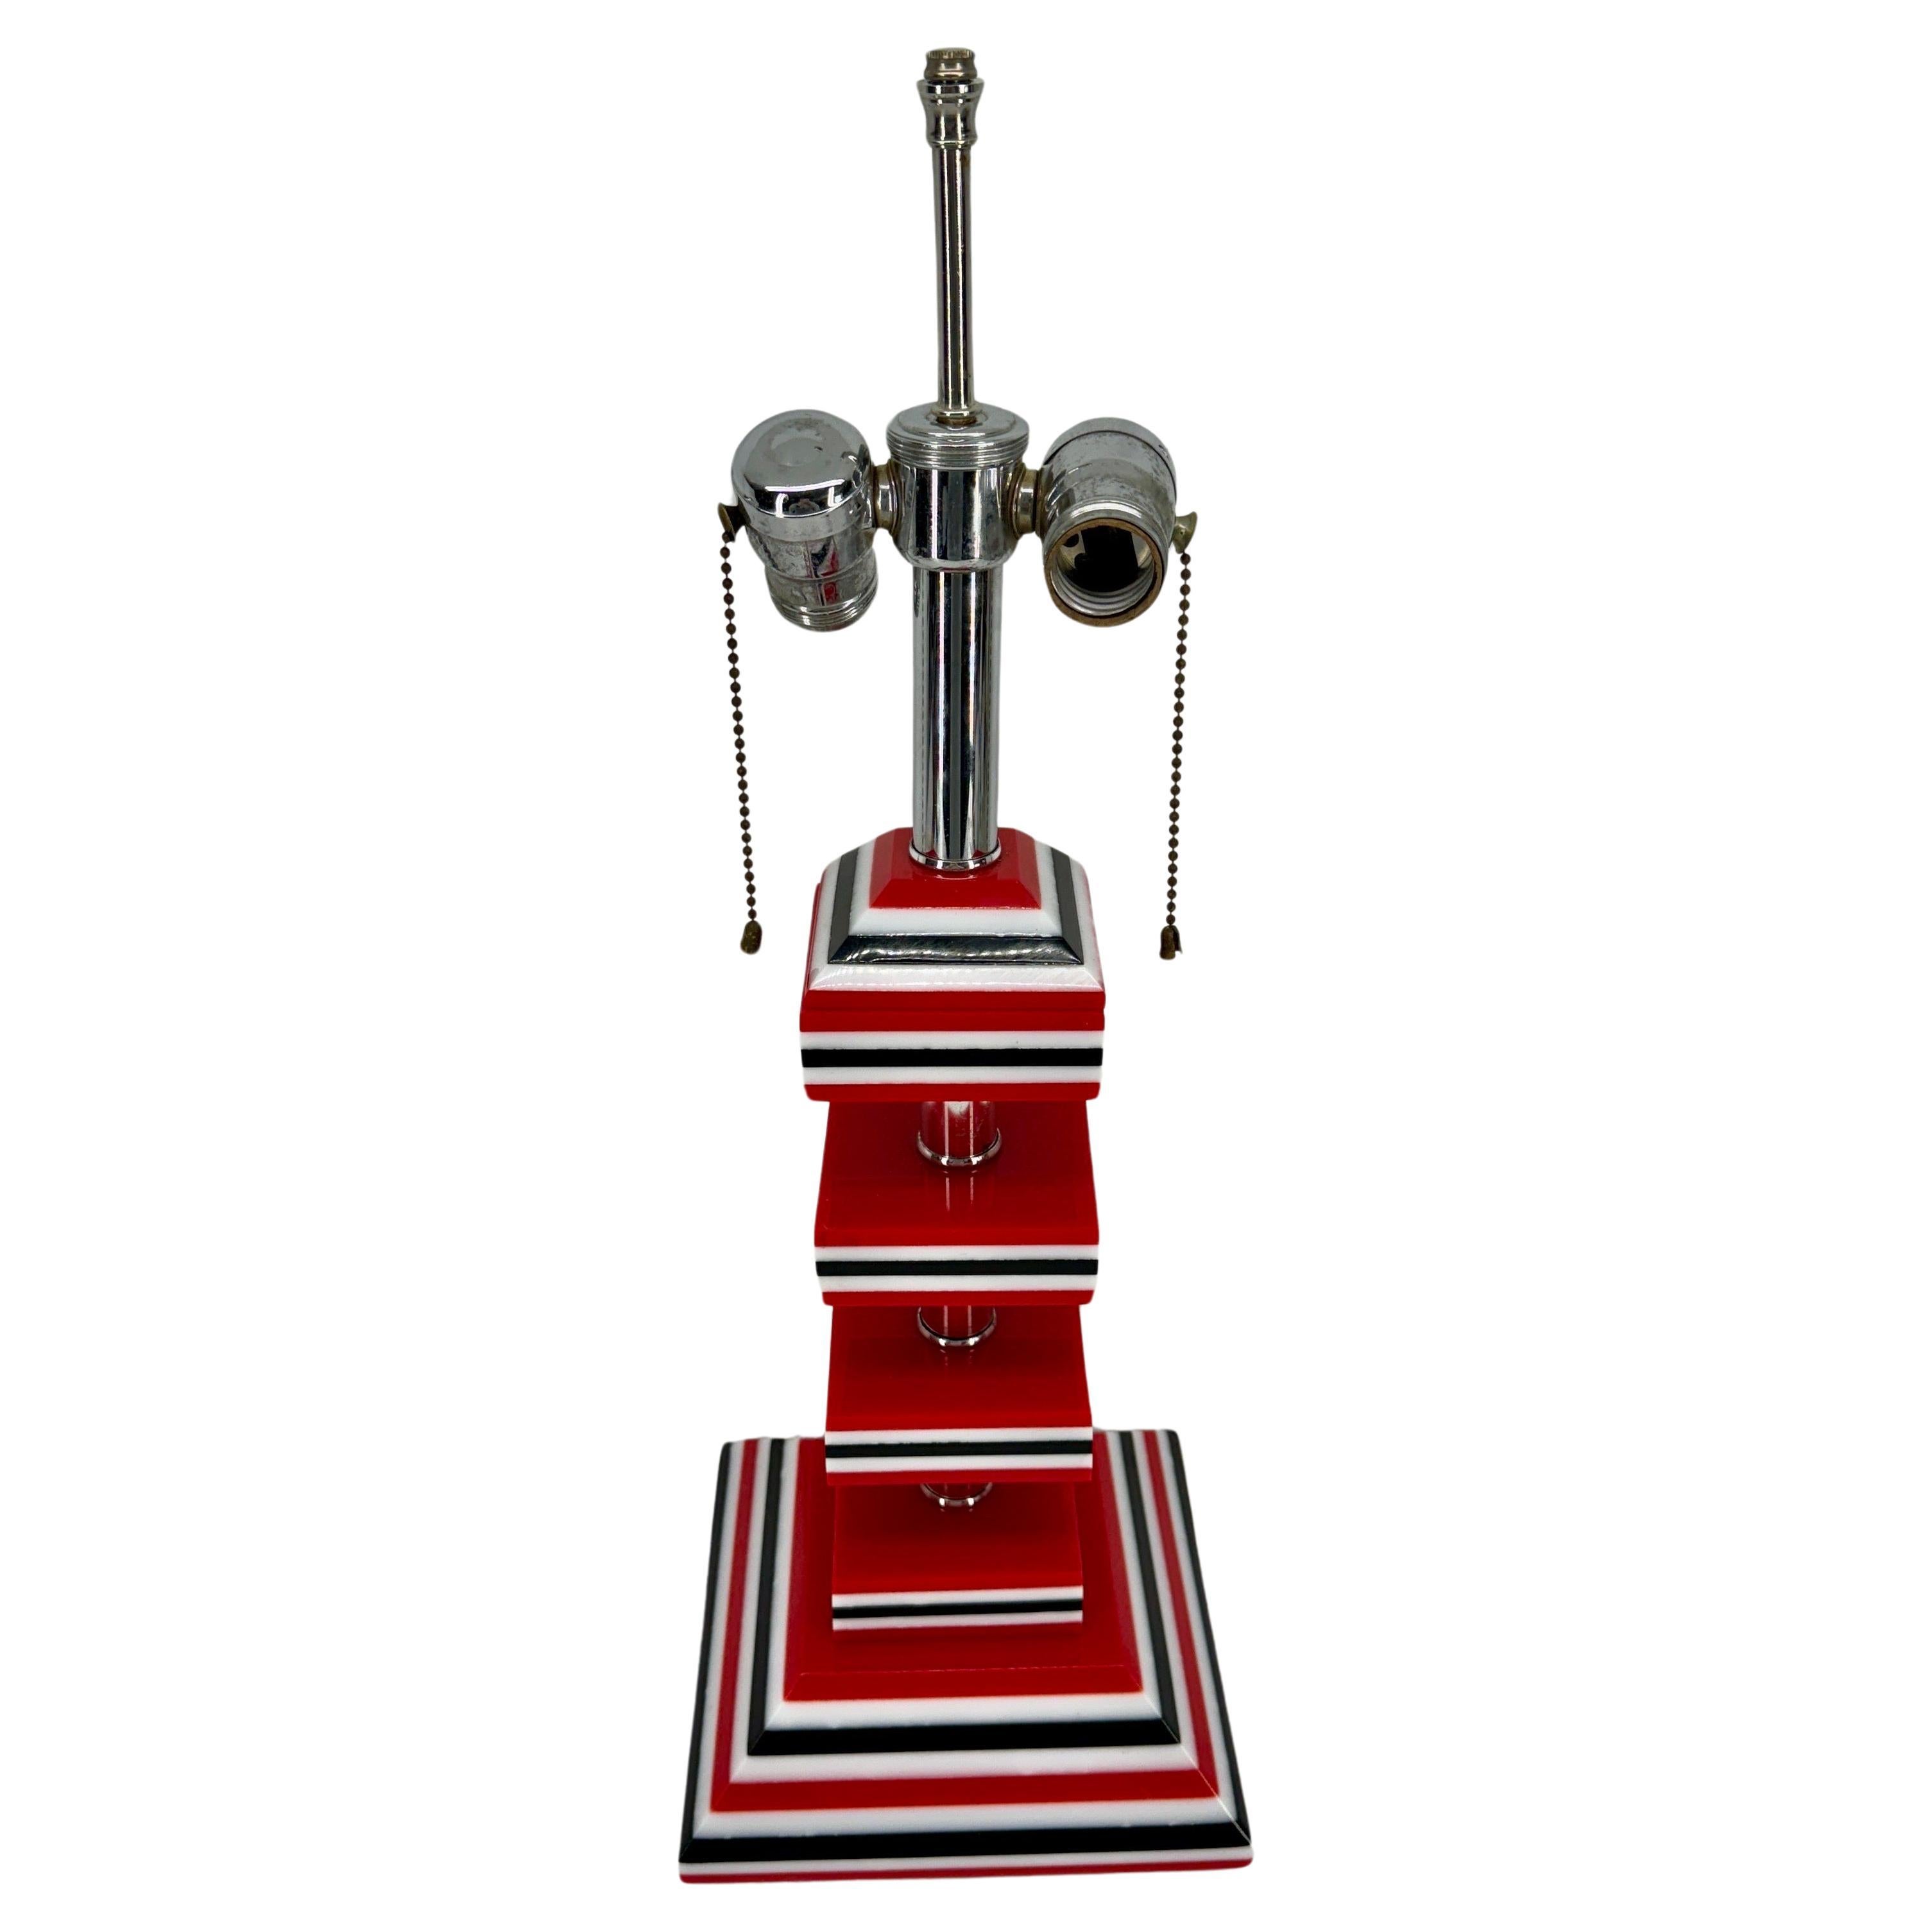 MId-Century Modern Italian 1970's table lamp in red, white and black lucite on square table lamp with chrome fittings.